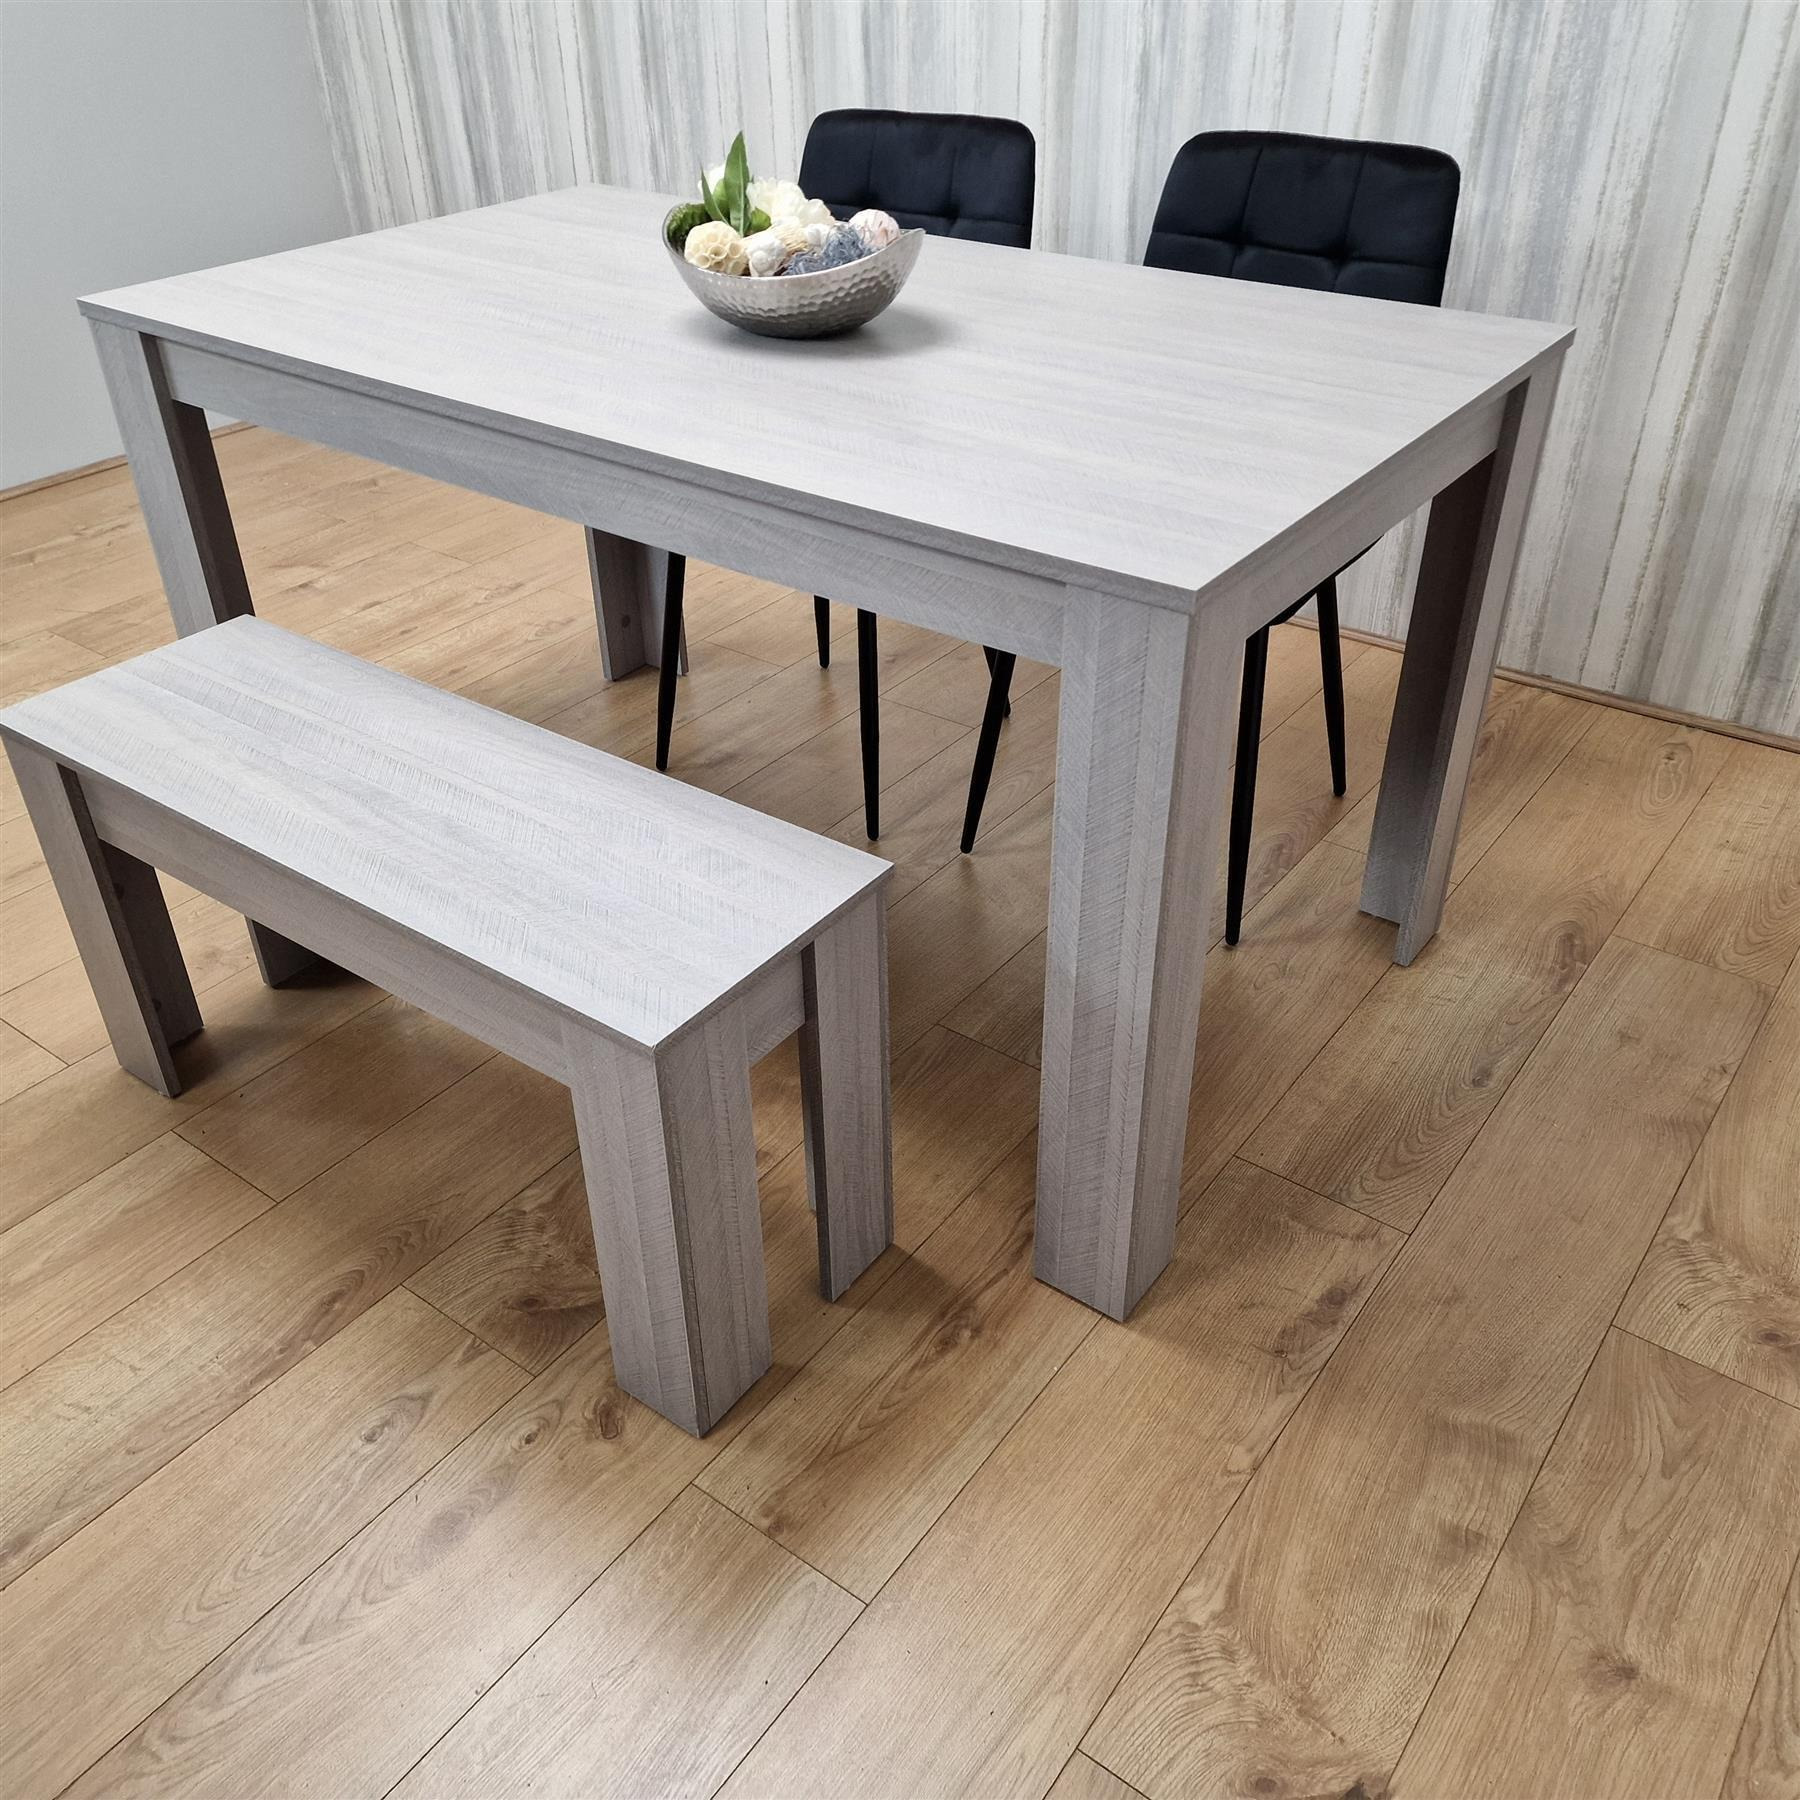 Dining Table Set with 2 Chairs Dining Room and Kitchen table set of 2, and Bench - image 1